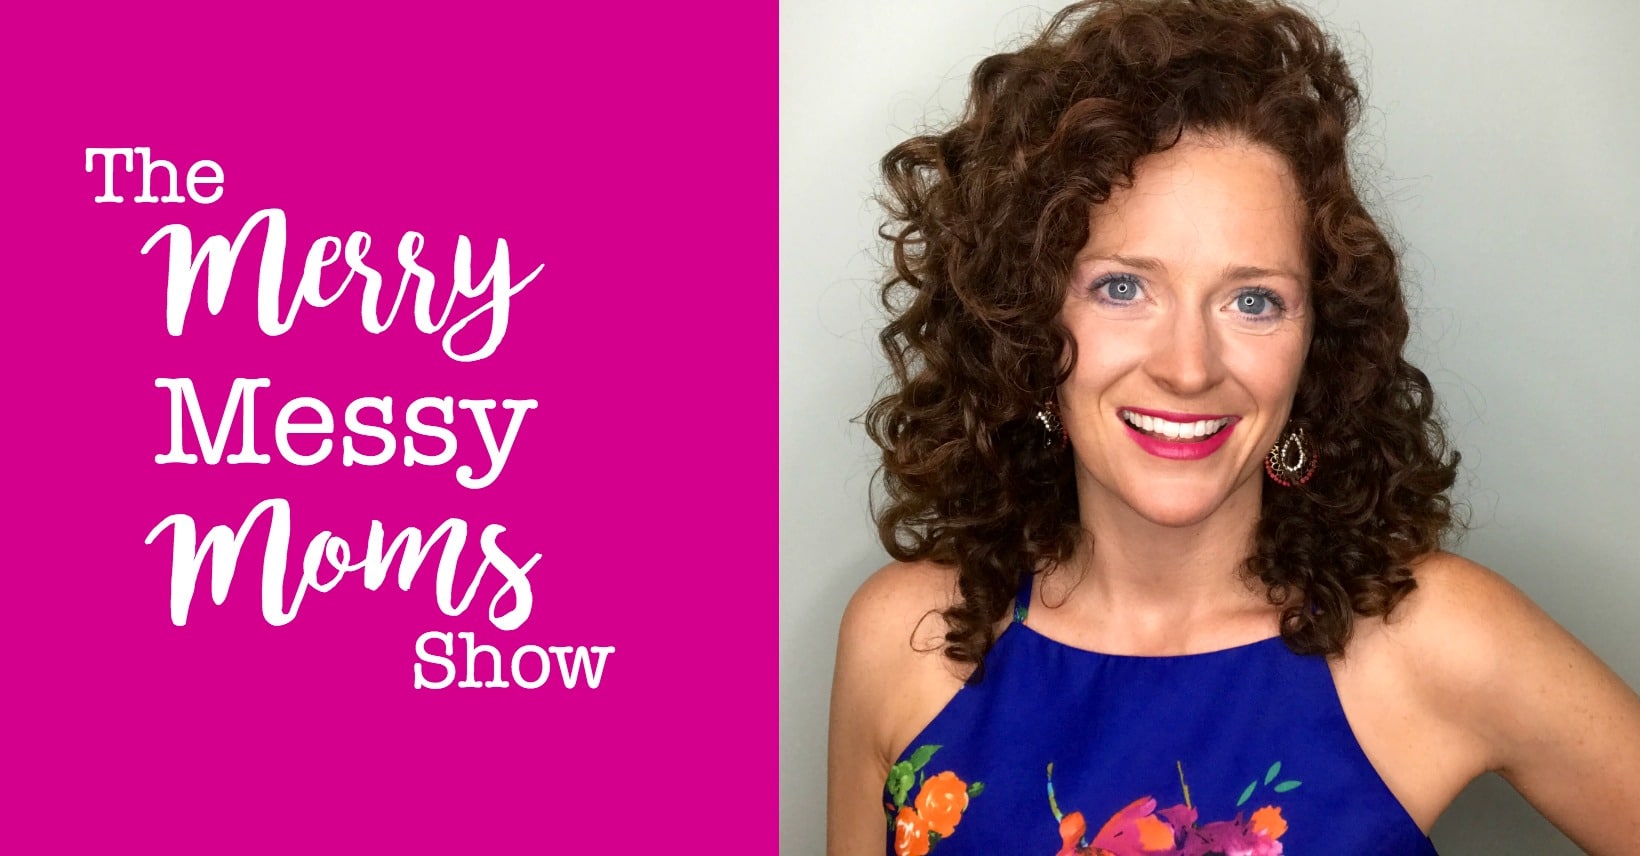 The Merry Messy Moms Show - Podcast